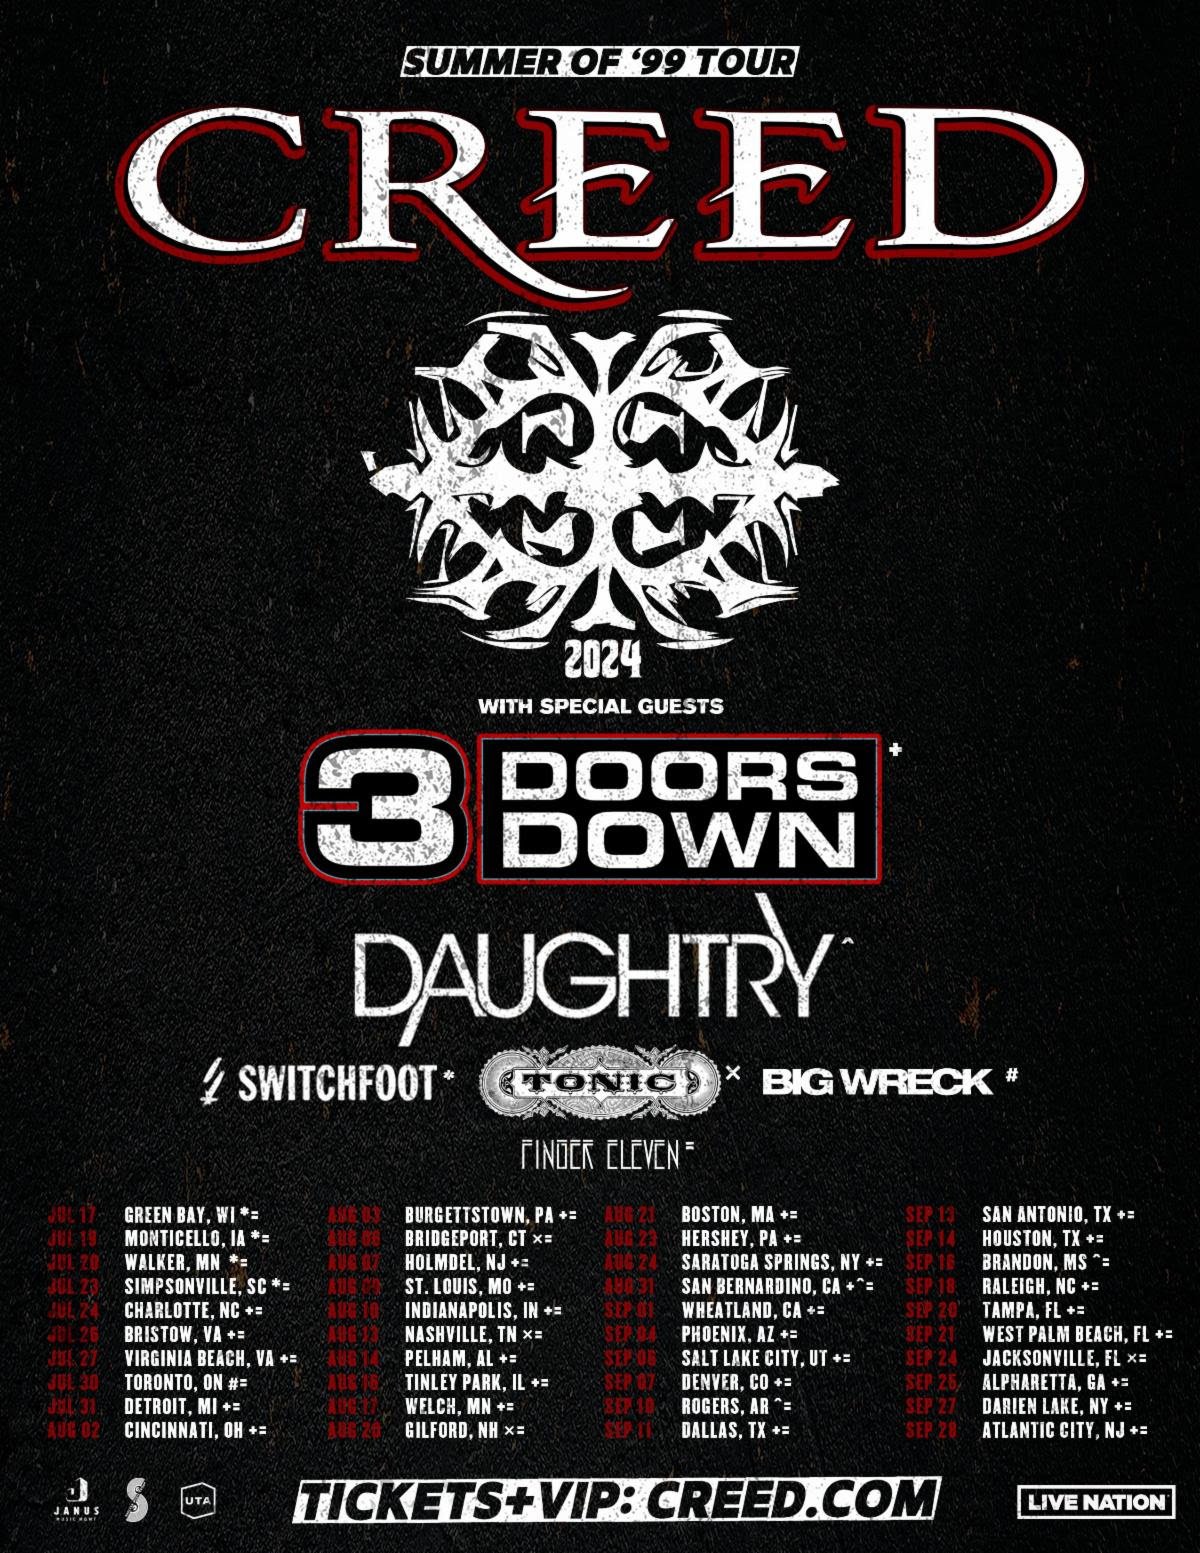 Creed Announces 2024 ‘summer Of ‘99 Tour The Dreadmusicreview